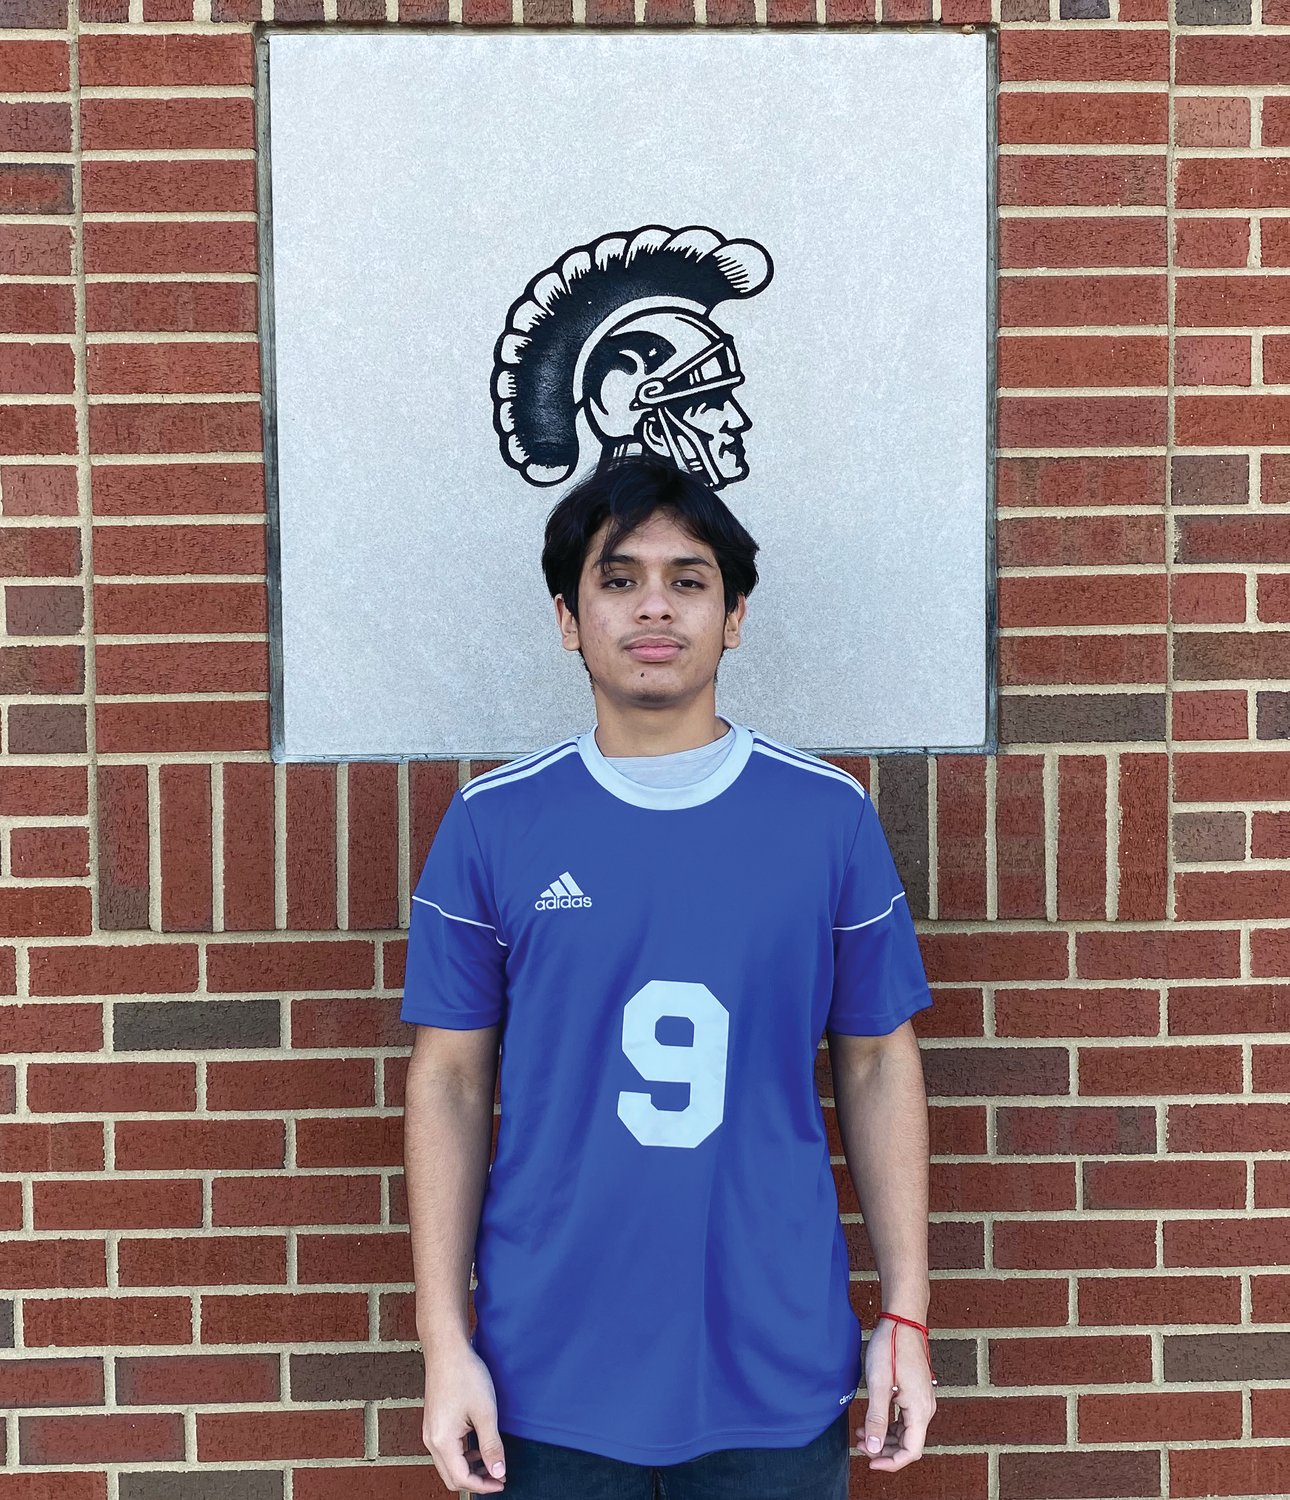 Crawfordsville senior Kevin Barrera led the Athenians to a second place finish in the Sagamore Conference with 13 goals and 15 assists.